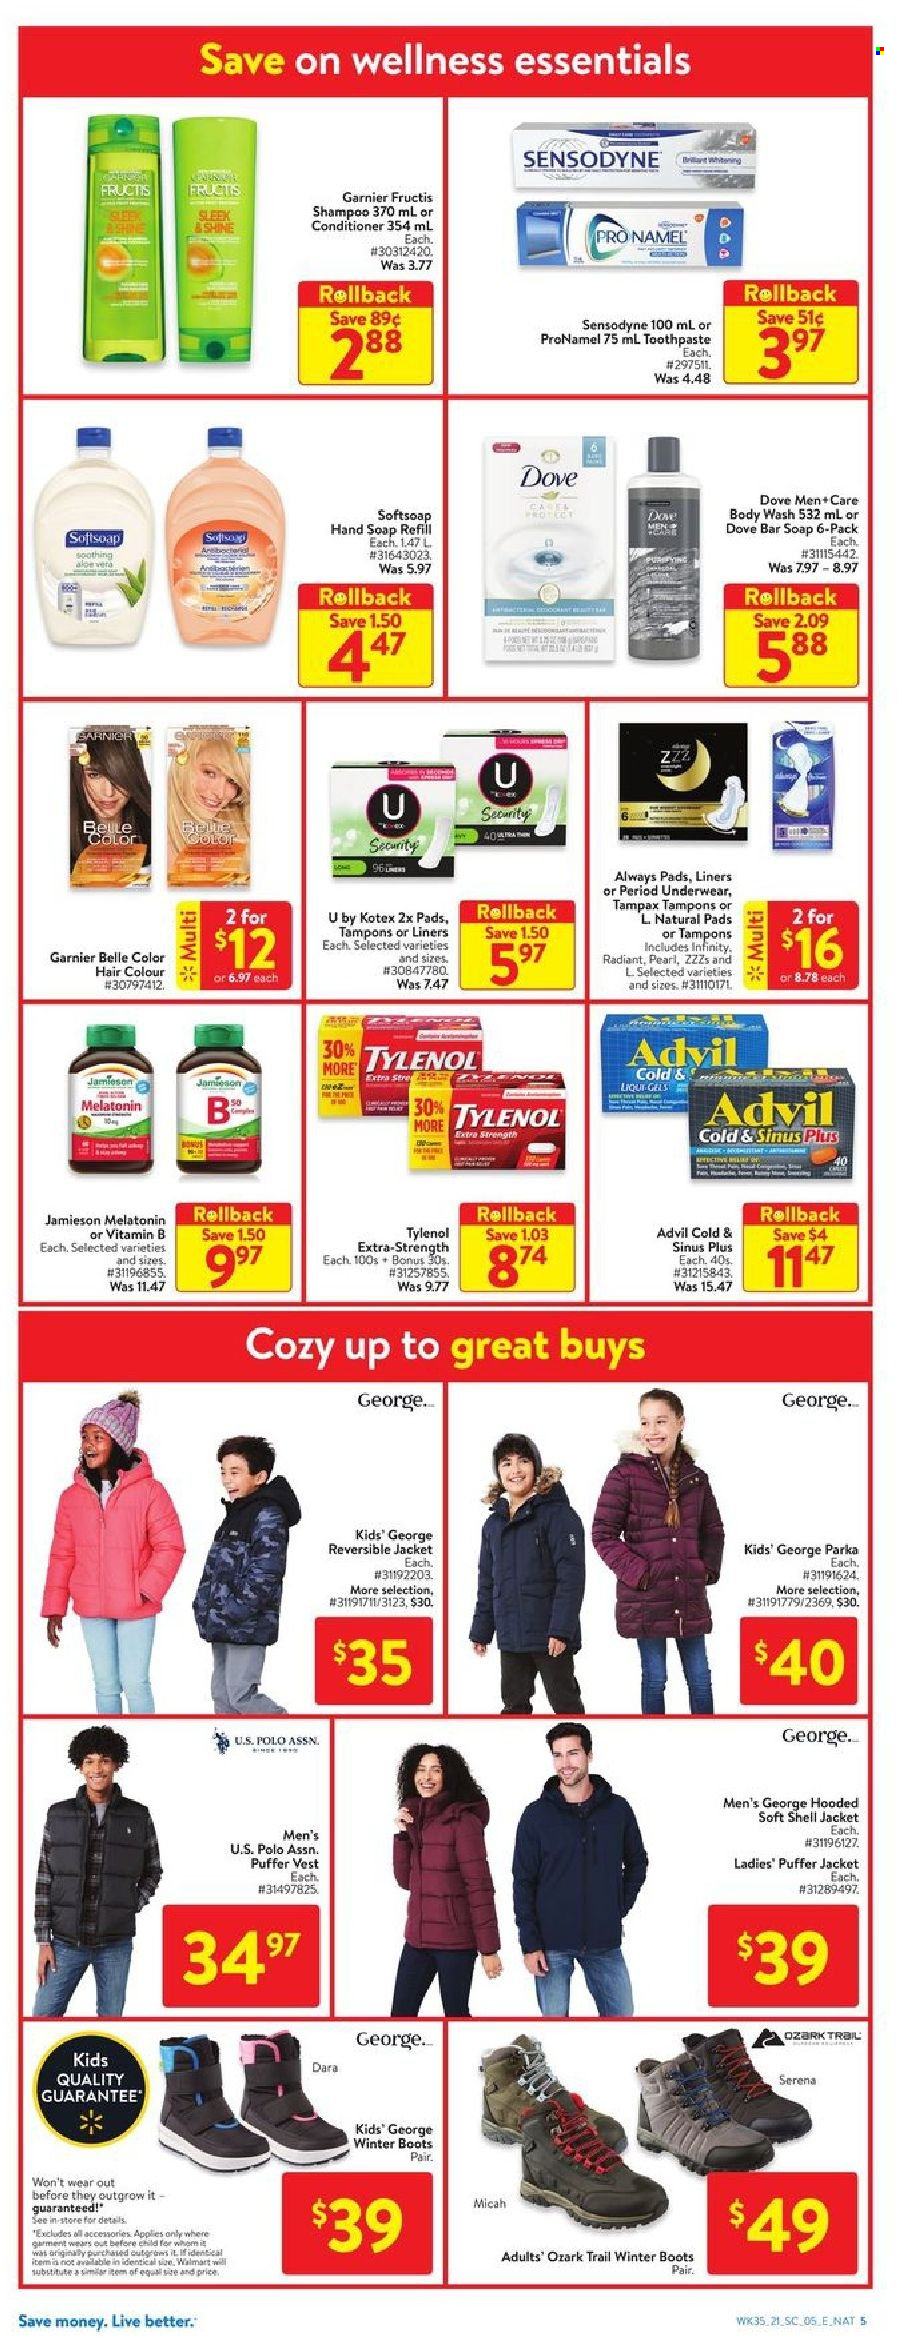 thumbnail - Walmart Flyer - September 23, 2021 - September 29, 2021 - Sales products - body wash, Softsoap, hand soap, soap bar, soap, toothpaste, Always pads, Kotex, tampons, Infinity, conditioner, hair color, Fructis, jacket, puffer jacket, U.S. POLO ASSN, vest, boots, winter boots, Shell, Melatonin, Tylenol, Advil Rapid, Dove, Garnier, shampoo, Tampax, parka, Sensodyne. Page 13.